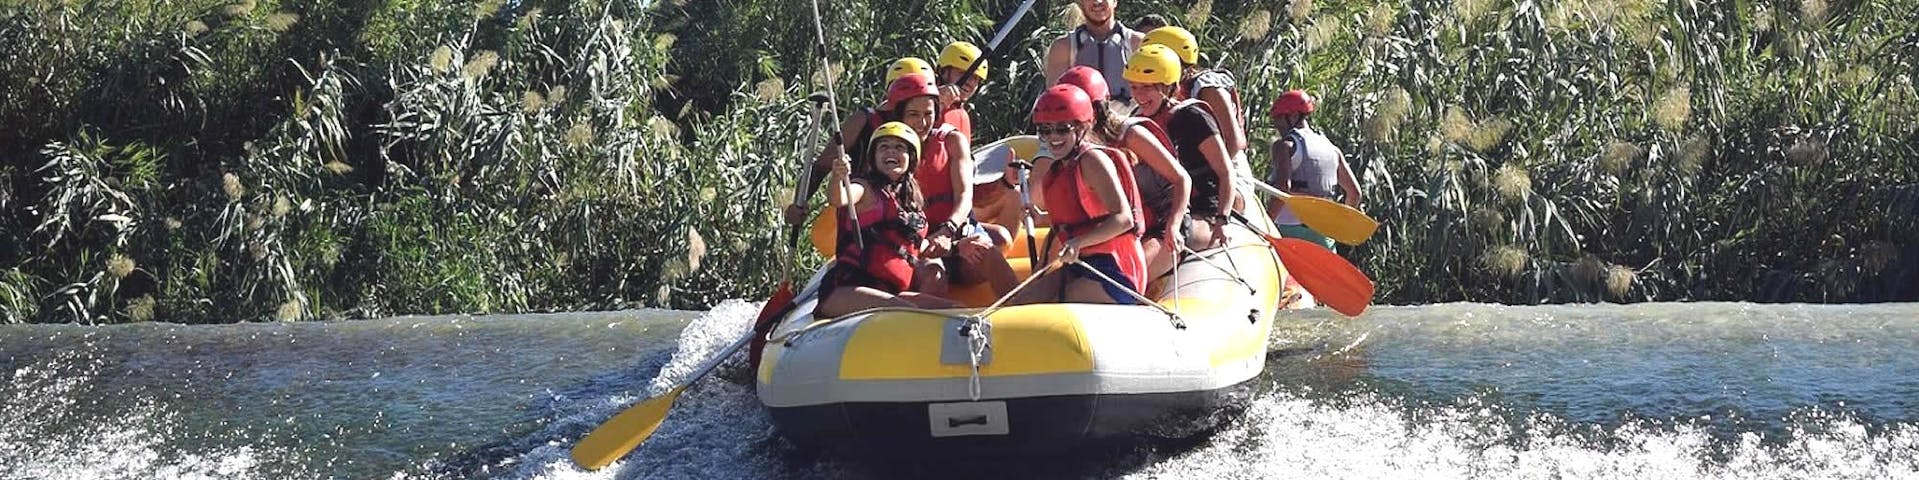 Participants of the Rafting "Classic" - Rio Segura are riding down a weir with an experienced rafting guide form Rafting Murcia.